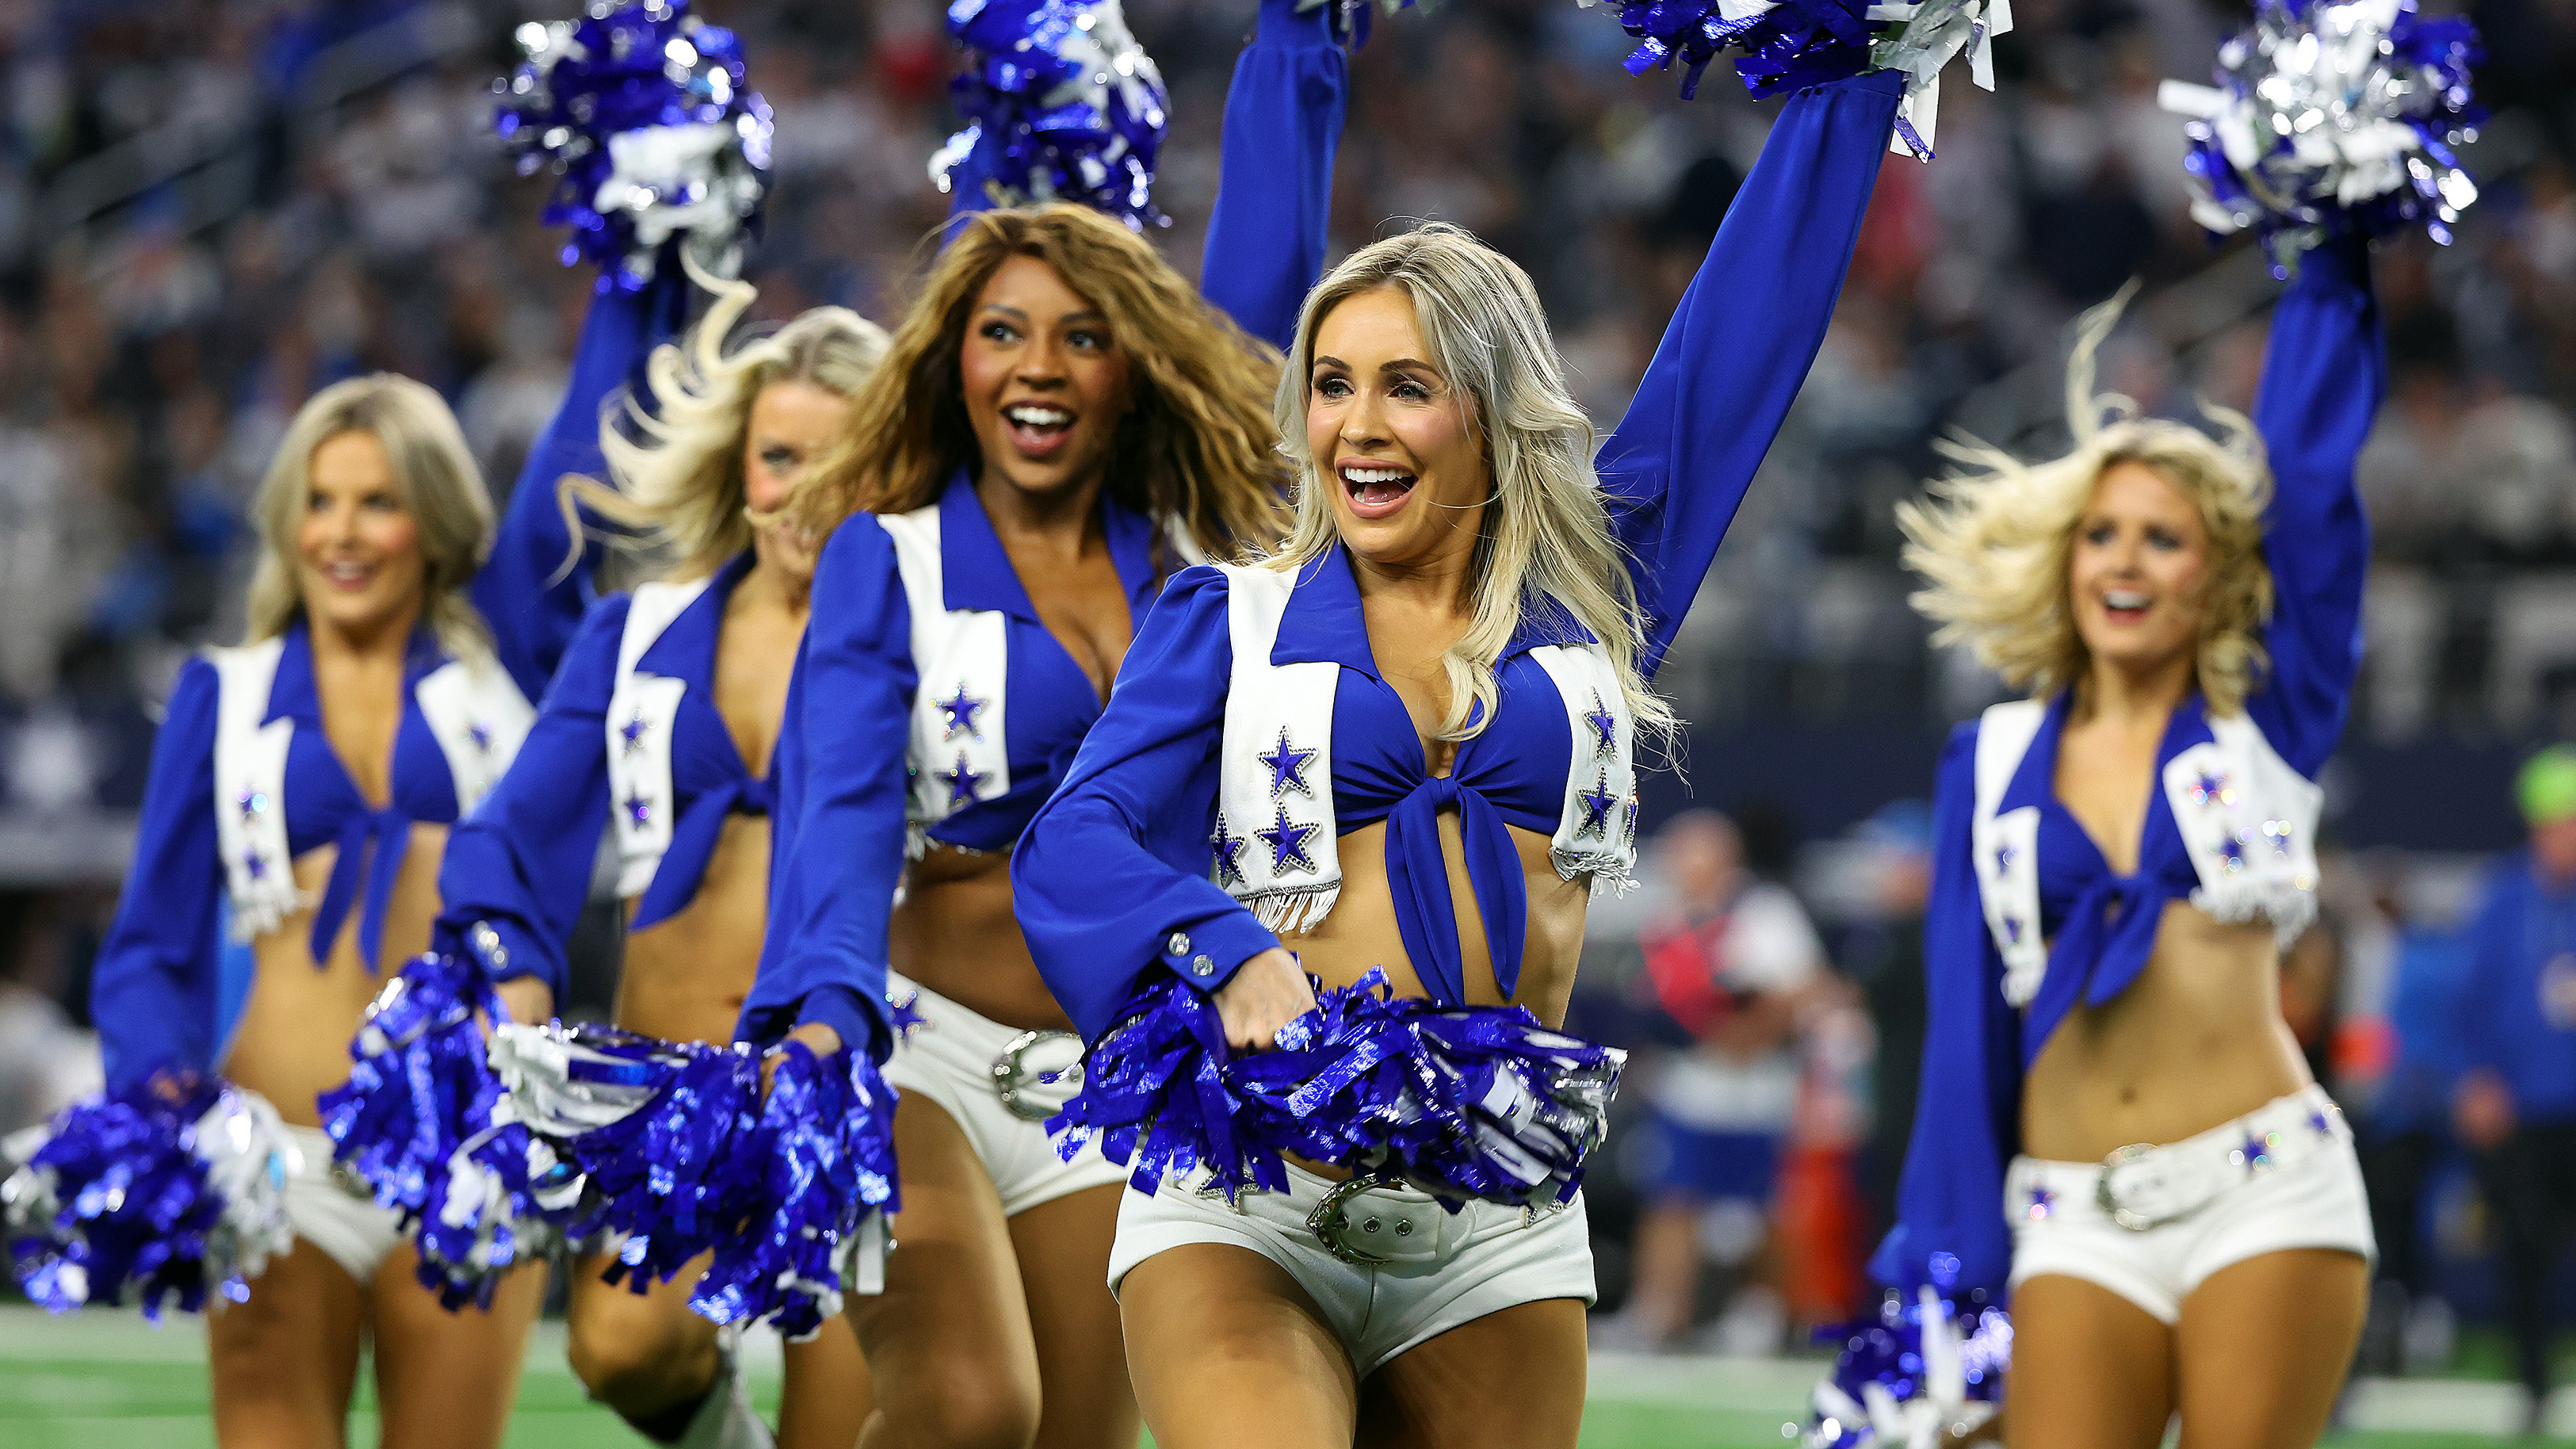 A new Dallas Cowboys Cheerleaders show is coming to Netflix this
summer